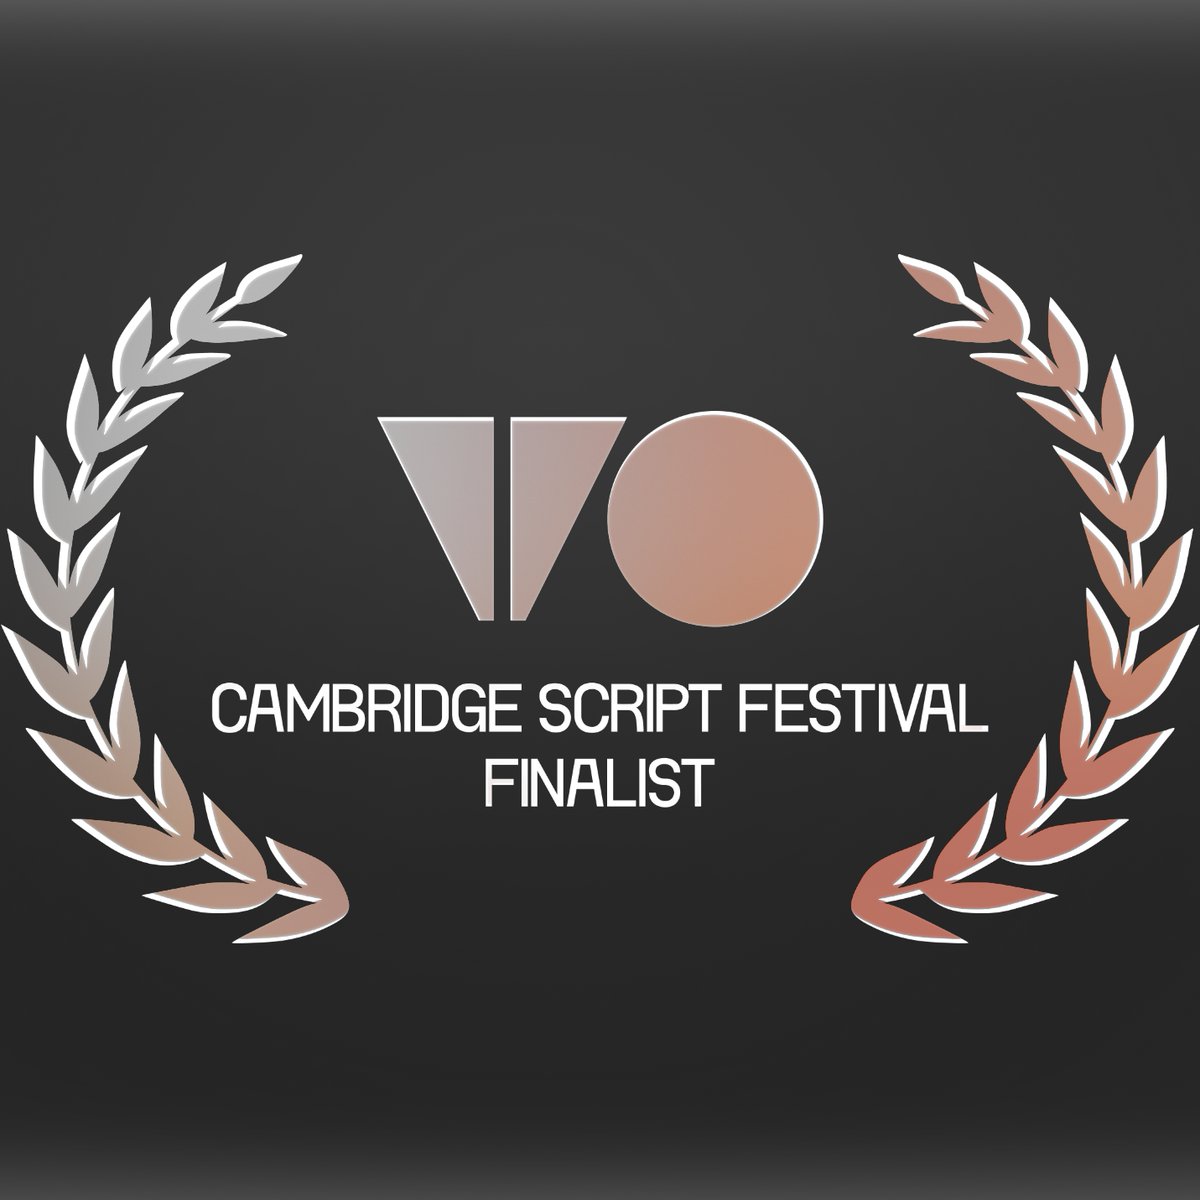 Very excited to make it to the Finals. It's nice to know things are headed in the right direction. Thank you CSF for extending such a warm welcome and putting in all the hard work necessary to host this fine event. 
#screenplaycontest  #writer #filmcommunity 
#filmfreeway